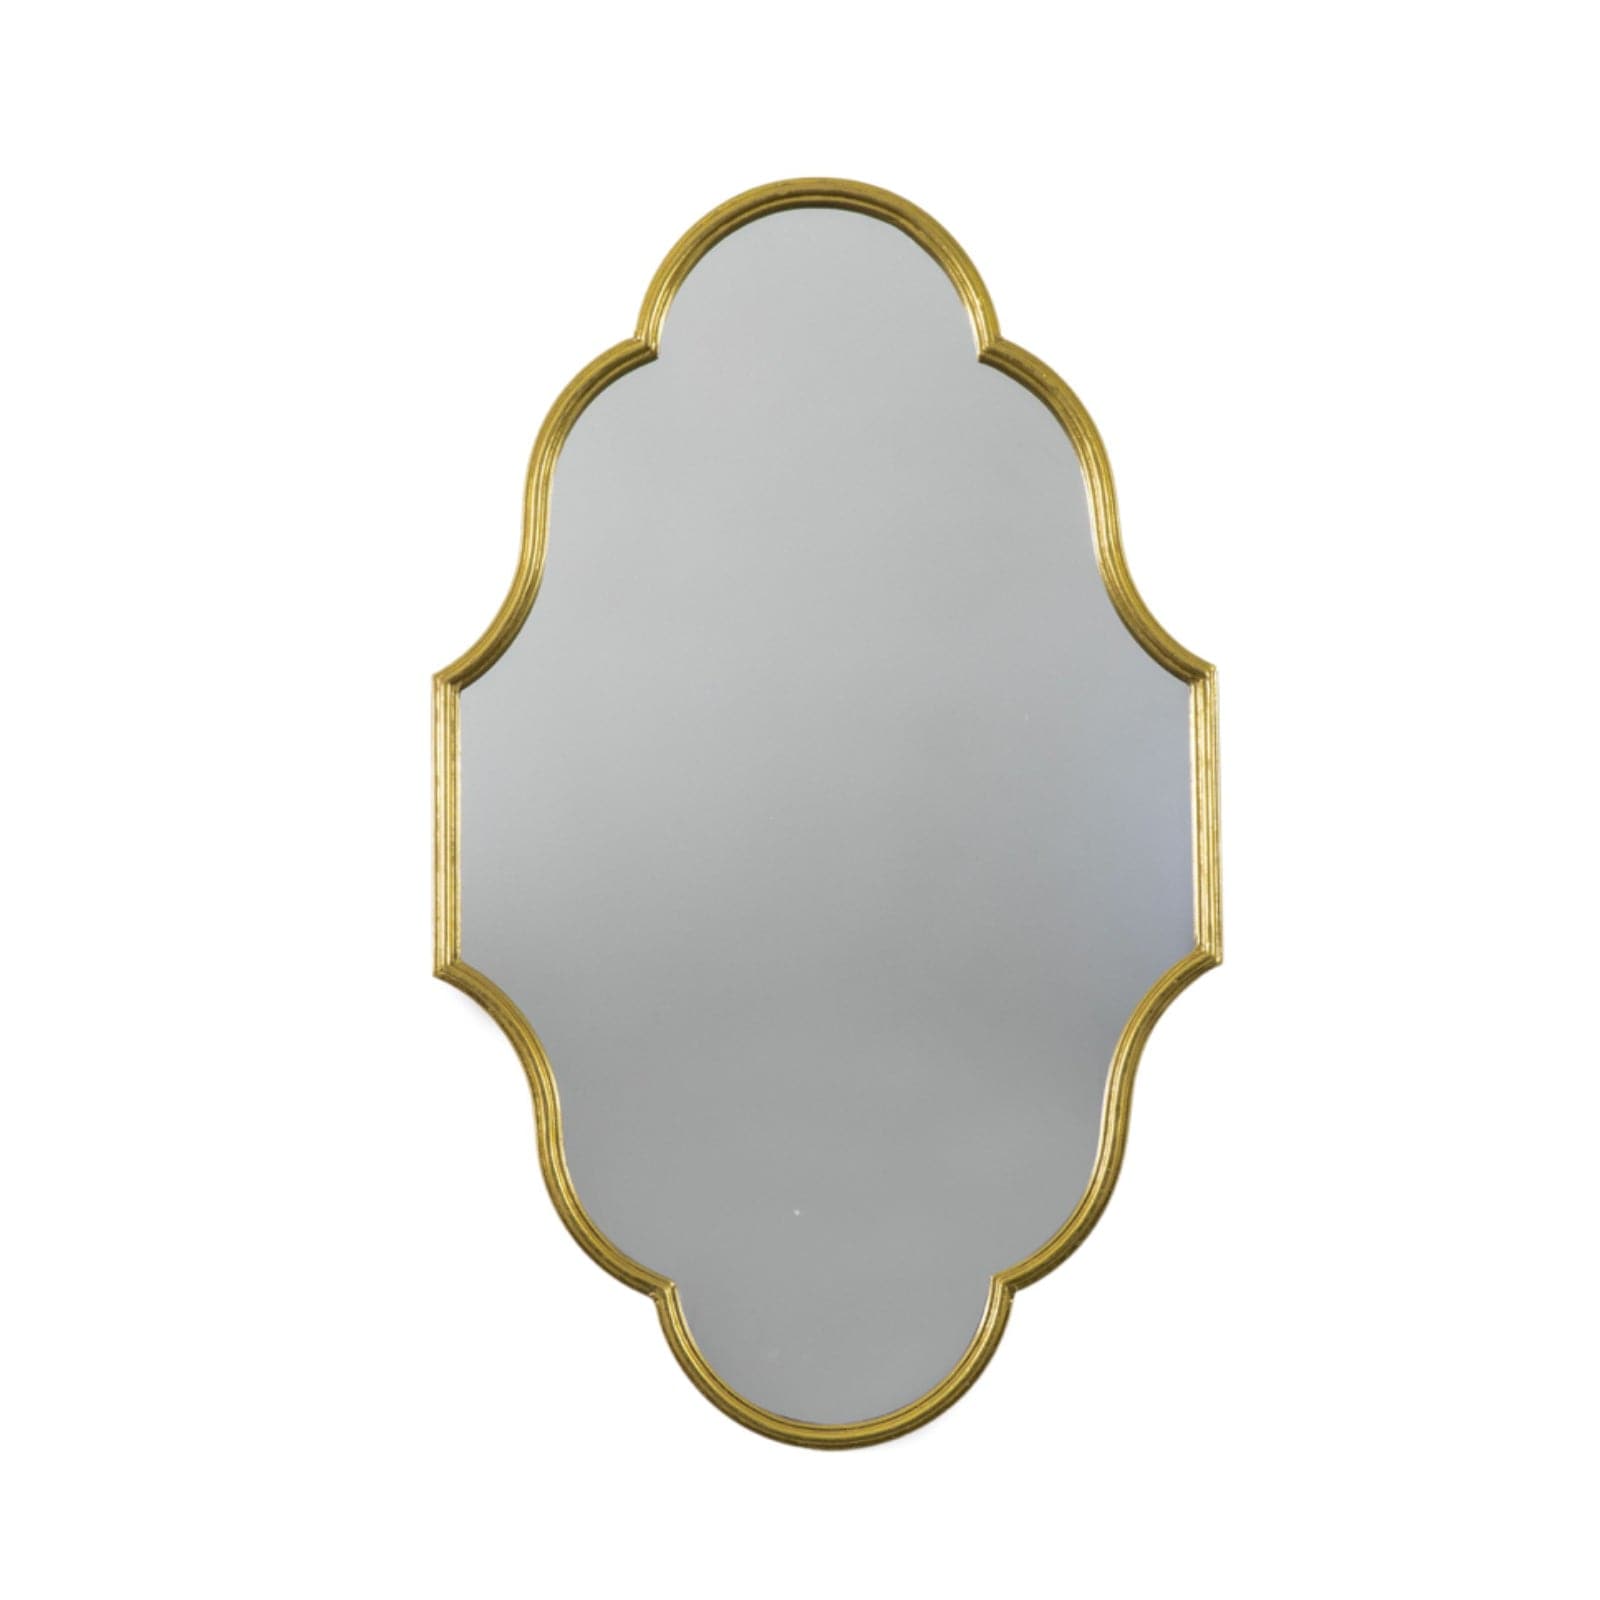 Decorative Distressed Gold Shaped Portrait Mirror - The Farthing